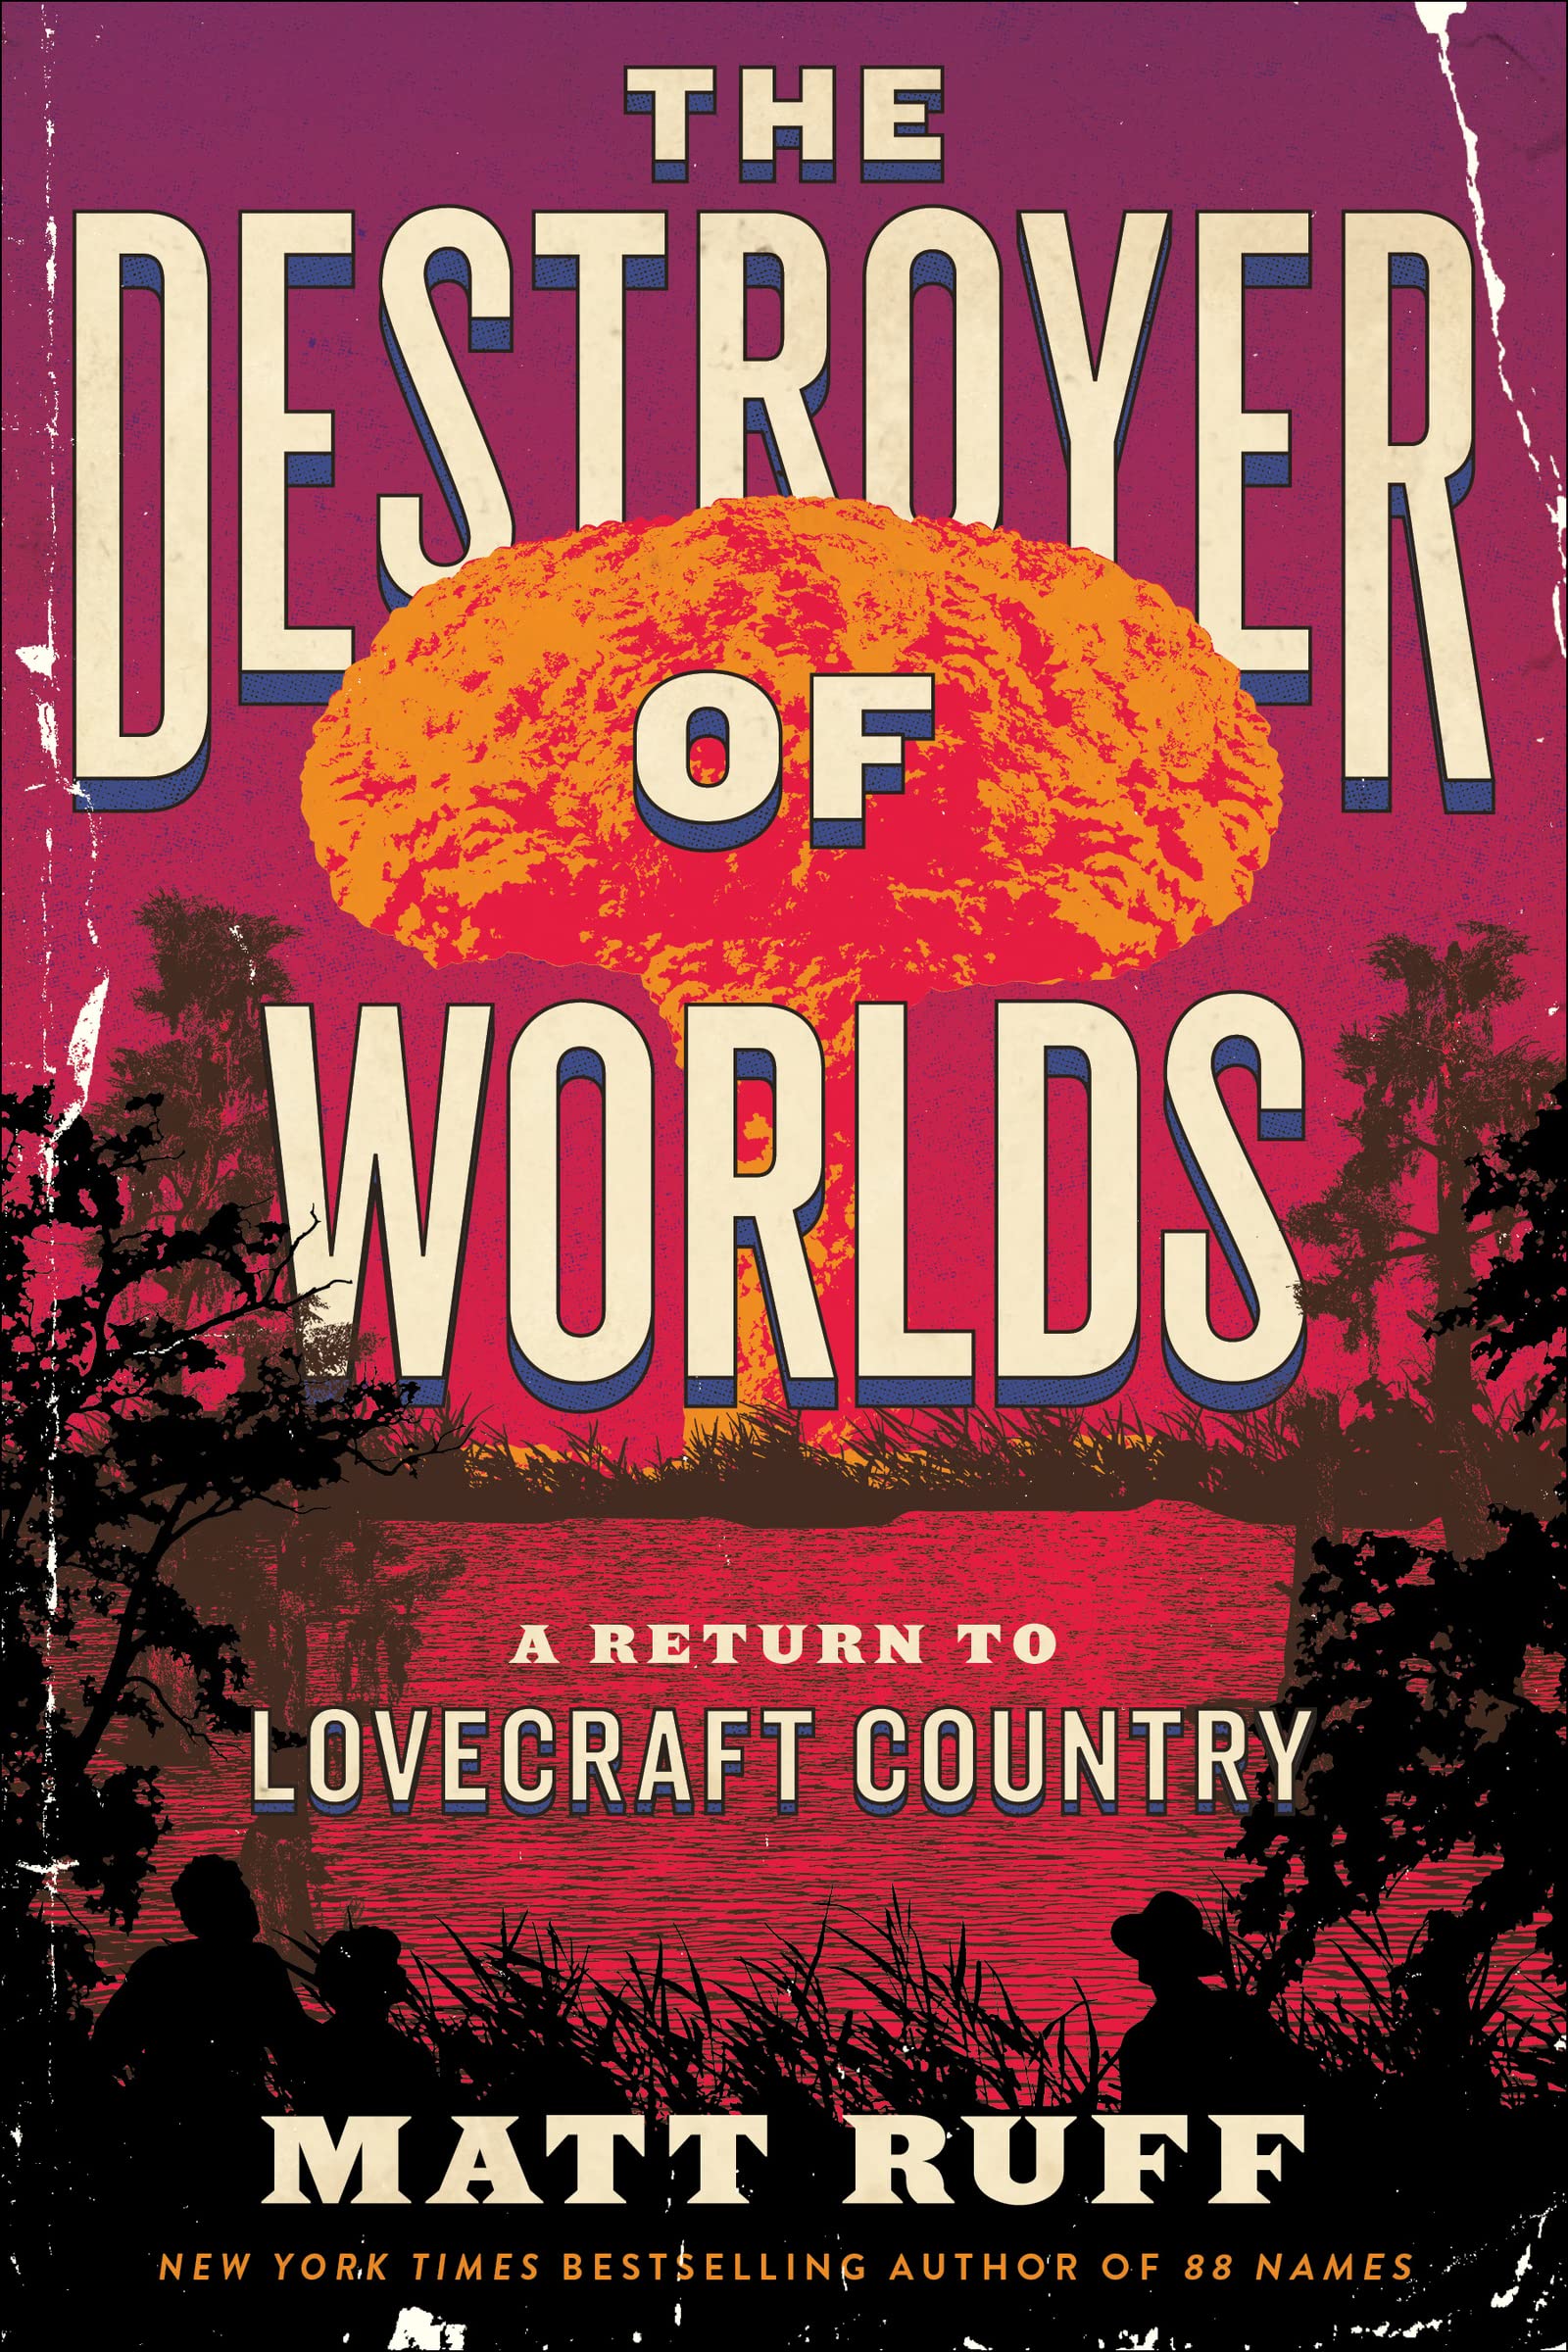 Image for "The Destroyer of Worlds"